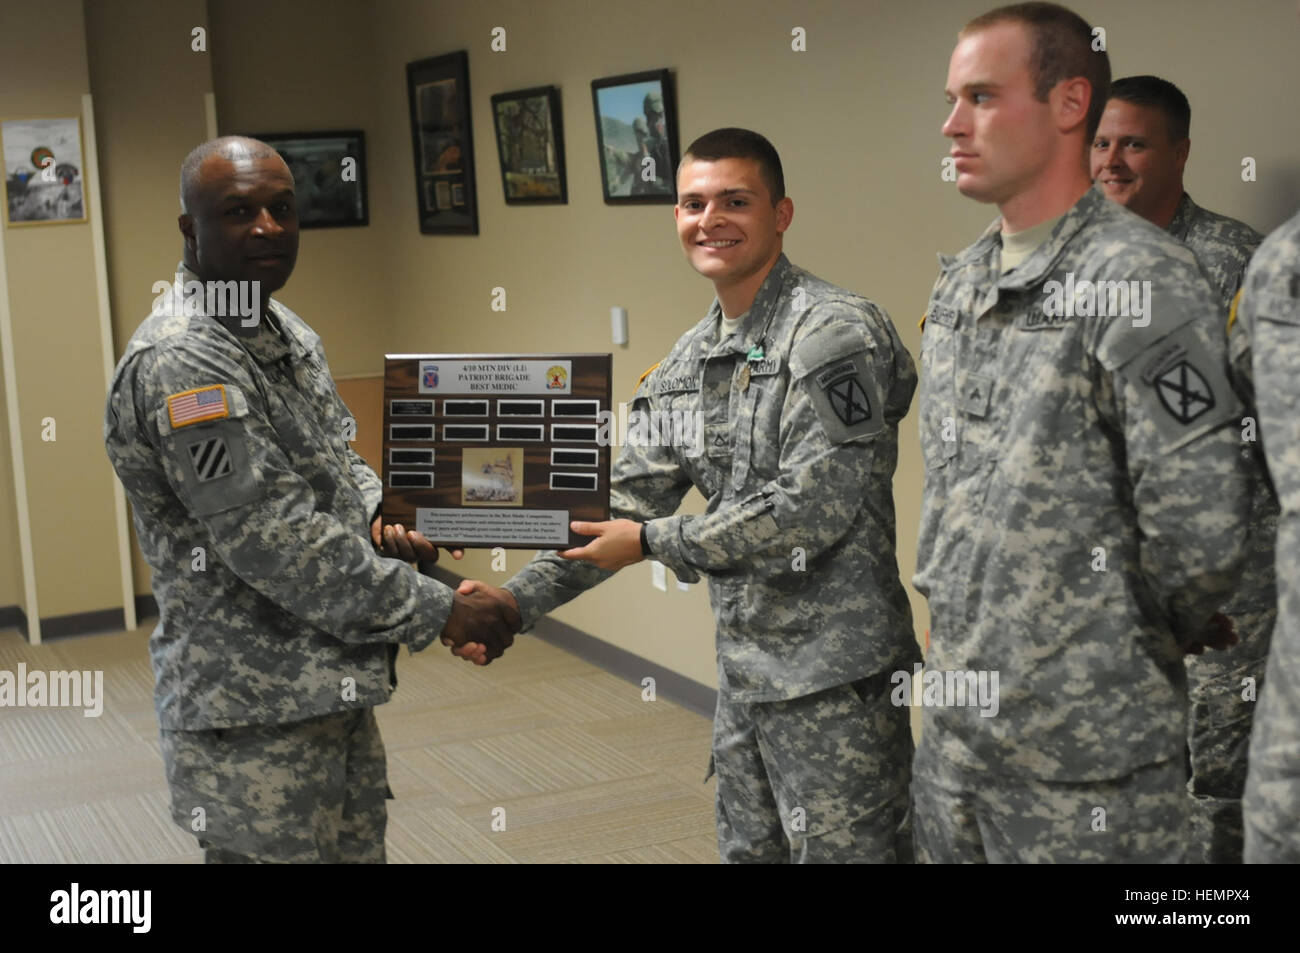 Col. Timothy U. Philips, Commander, 4th Brigade, 10th Mountain Division, Provisional, presents Pfc. Nicholas Solomon, Headquarters Company, 2nd Battalion, 4th Infantry Regiment, 4th Brigade, 10th Mountain Division, with a plaque for winning the Patriot Brigade's Best Medic Competition held at Brigade Headquarters Building on Sept 11. The Patriot Brigade's Best Medic Competition 130909-A-CB167-203 Stock Photo